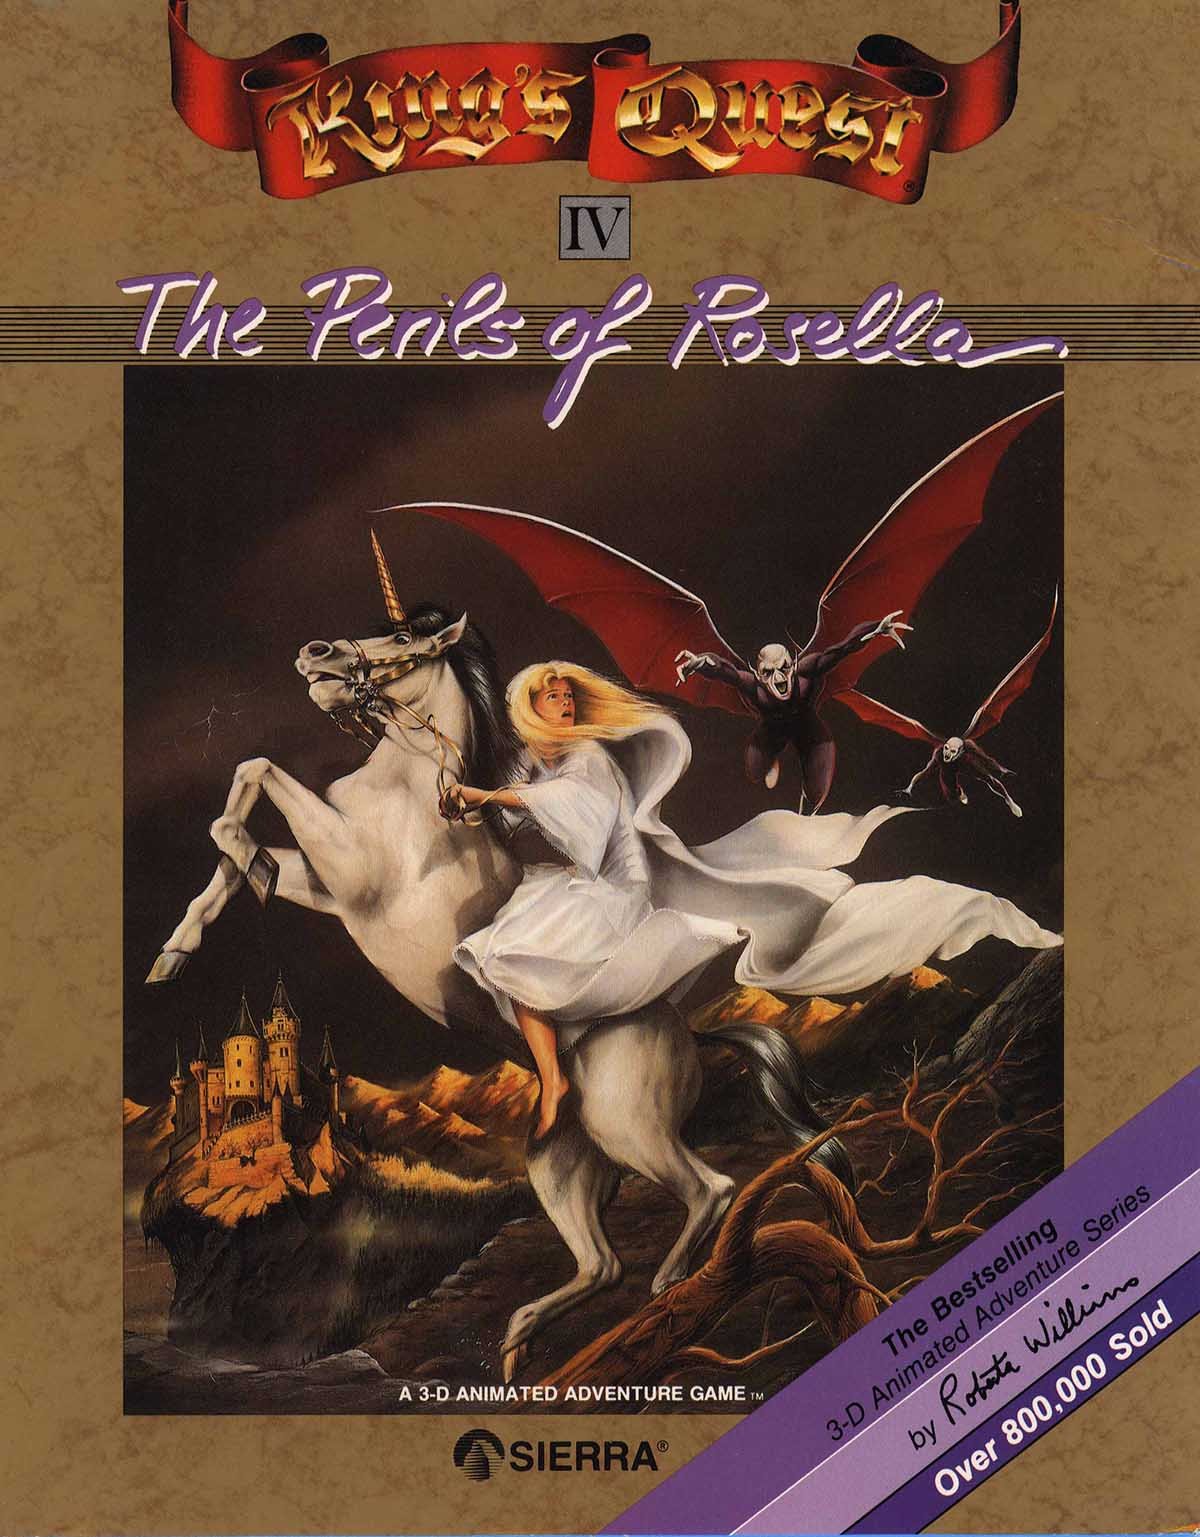 Image of King's Quest IV: The Perils of Rosella